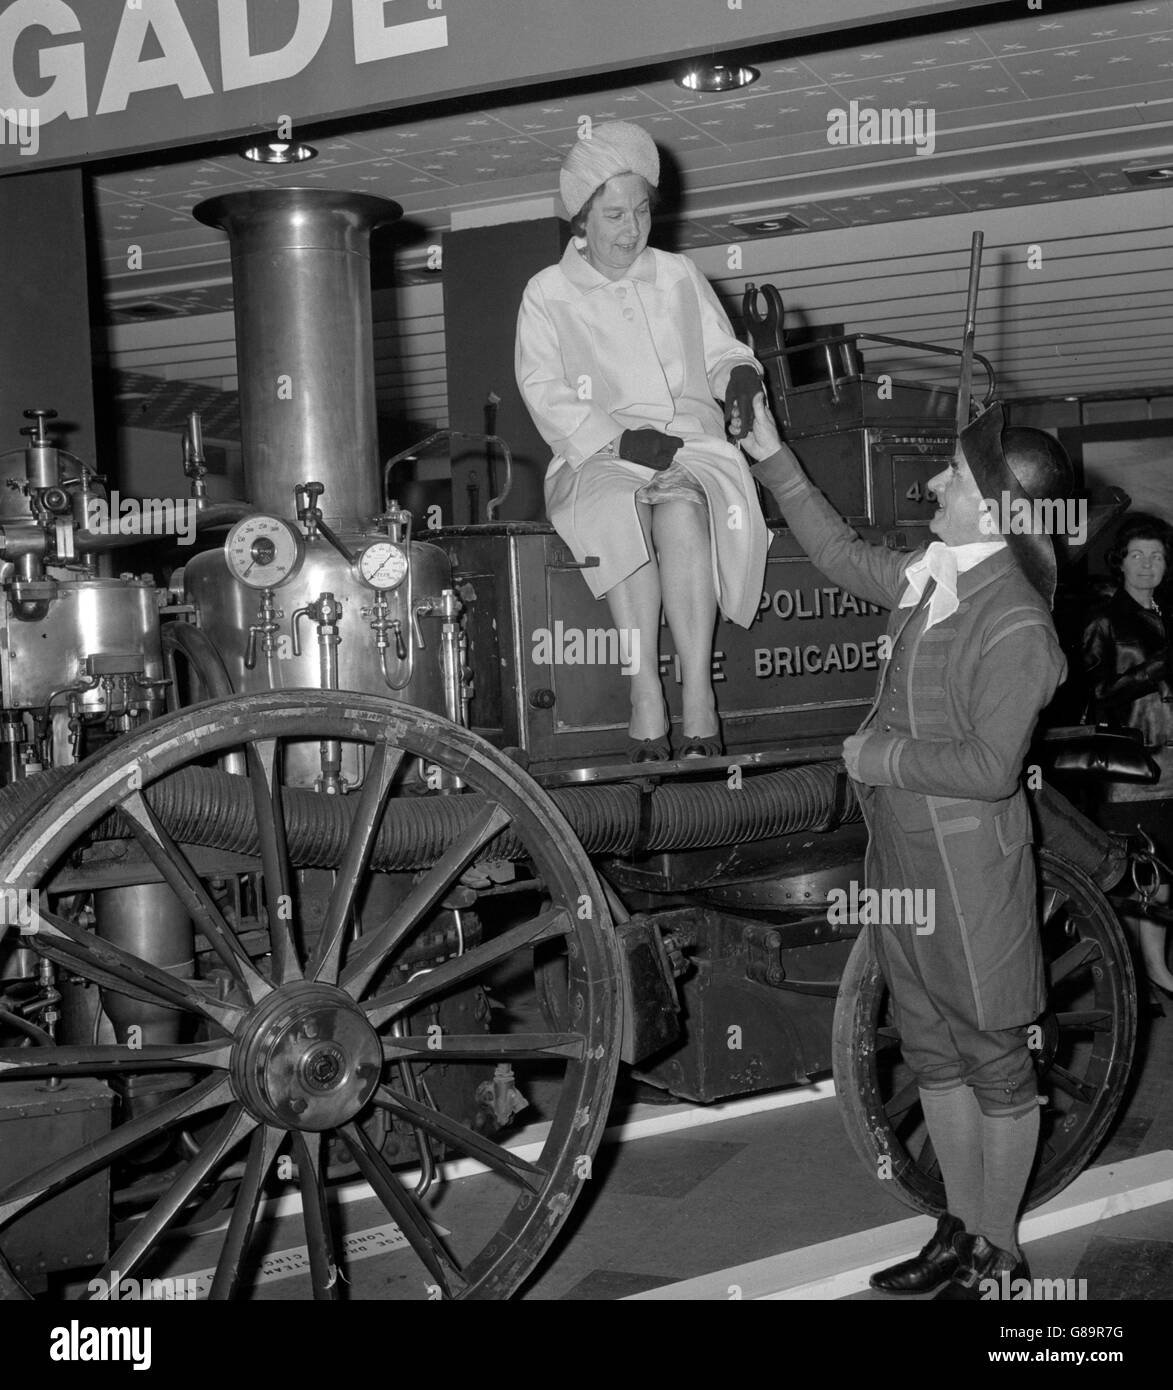 Alice Bacon, CBE, Minister of State, Home Office, tries the seat on an 1860 horse-drawn fire engine when she opened the London Fire Brigade's Centenary Exhibition at Selfridge's in Oxford Street, London. Explaining the exhibit is Crofton Preen, wearing the Phoenix Insurance Company Fire Uniform of the early 18th century, when the insurance companies were responsible for fire-fighting. Stock Photo